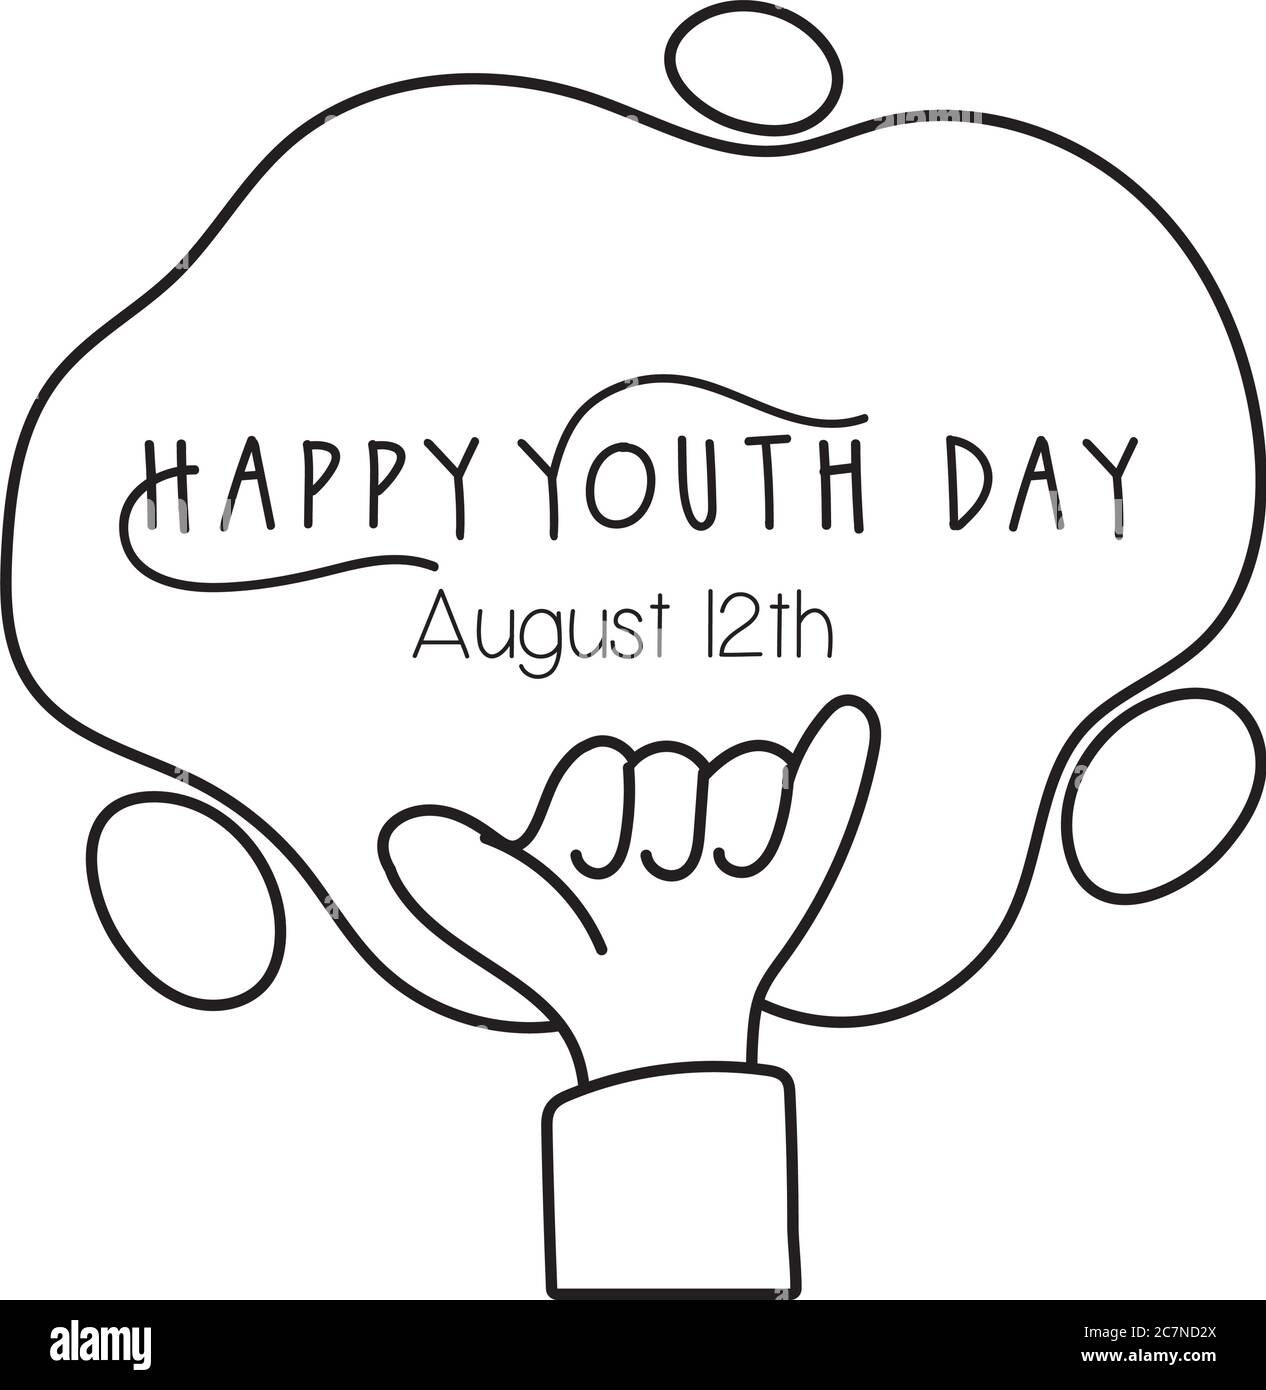 happy youth day lettering with hand rock and roll symbol line style vector illustration design Stock Vector